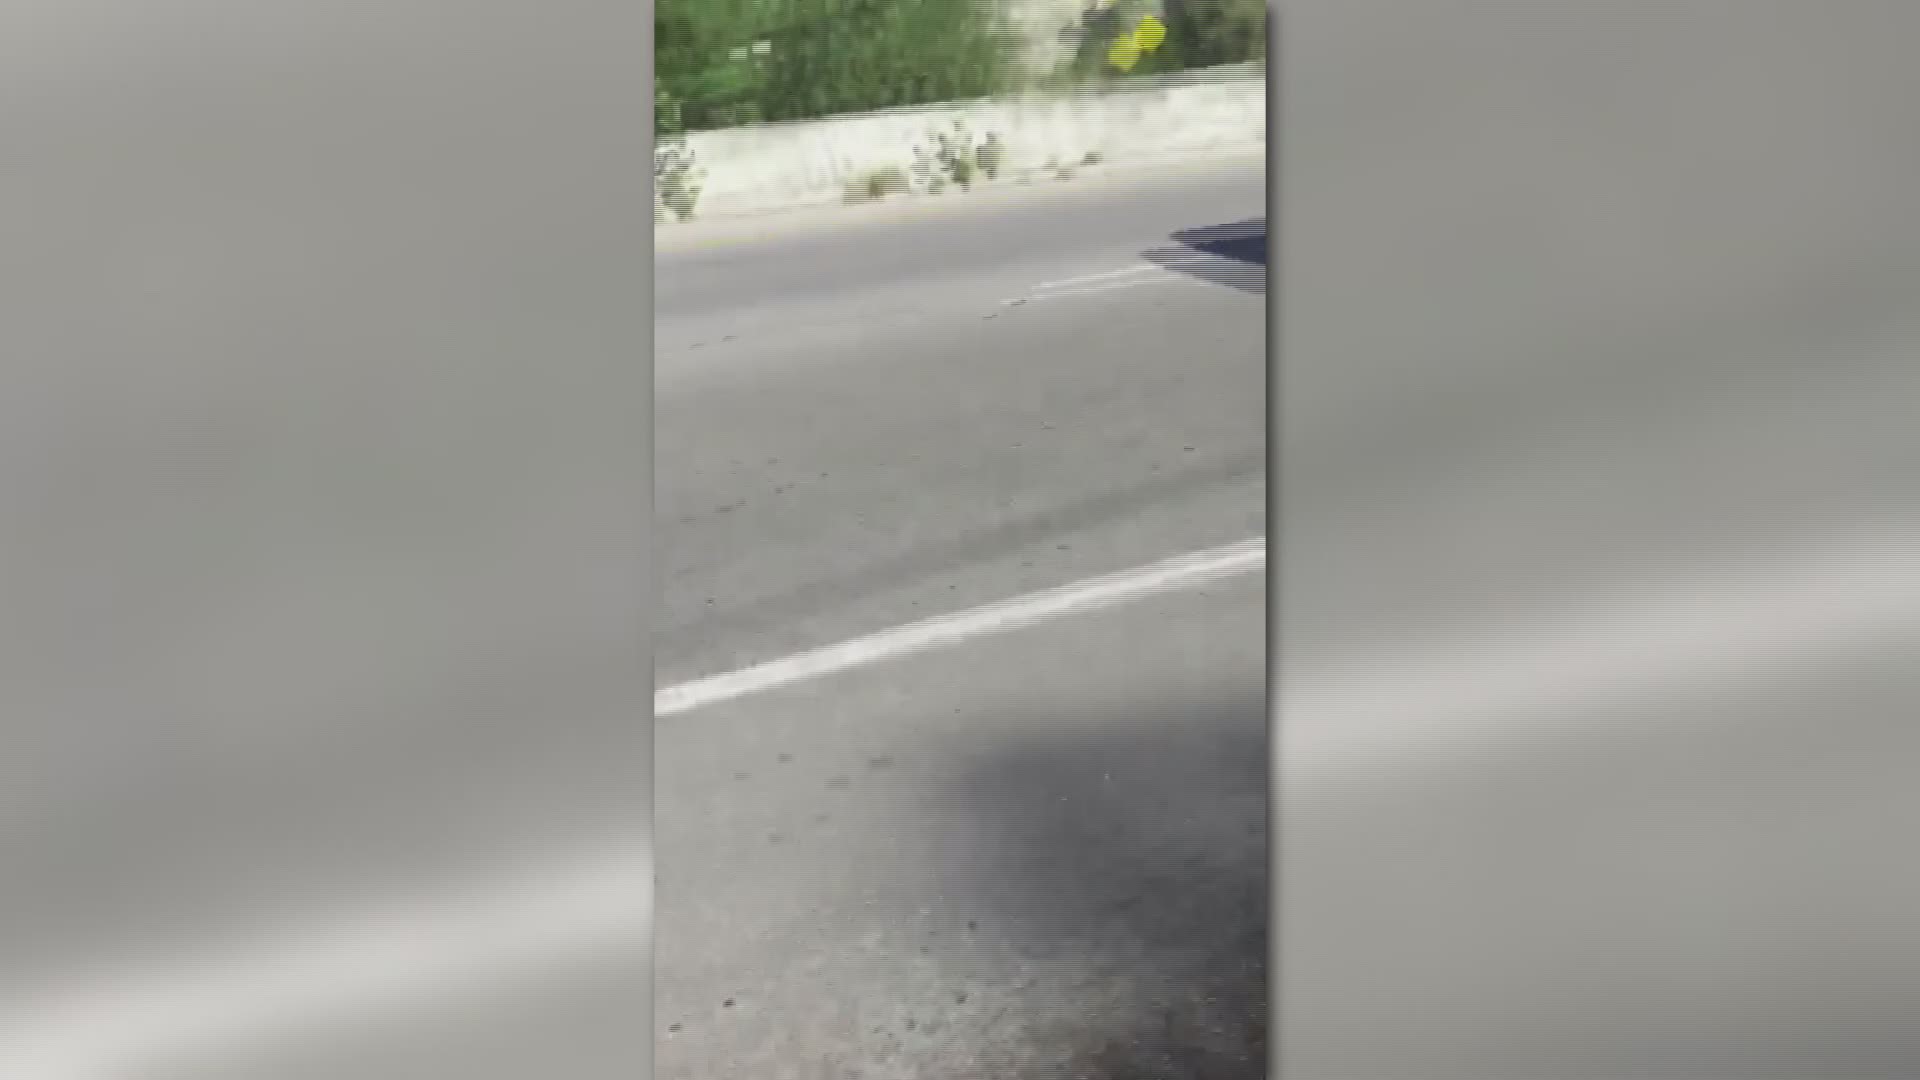 A KVUE view captured this video of a reported domestic dispute and car crash near the Pennybacker Bridge.